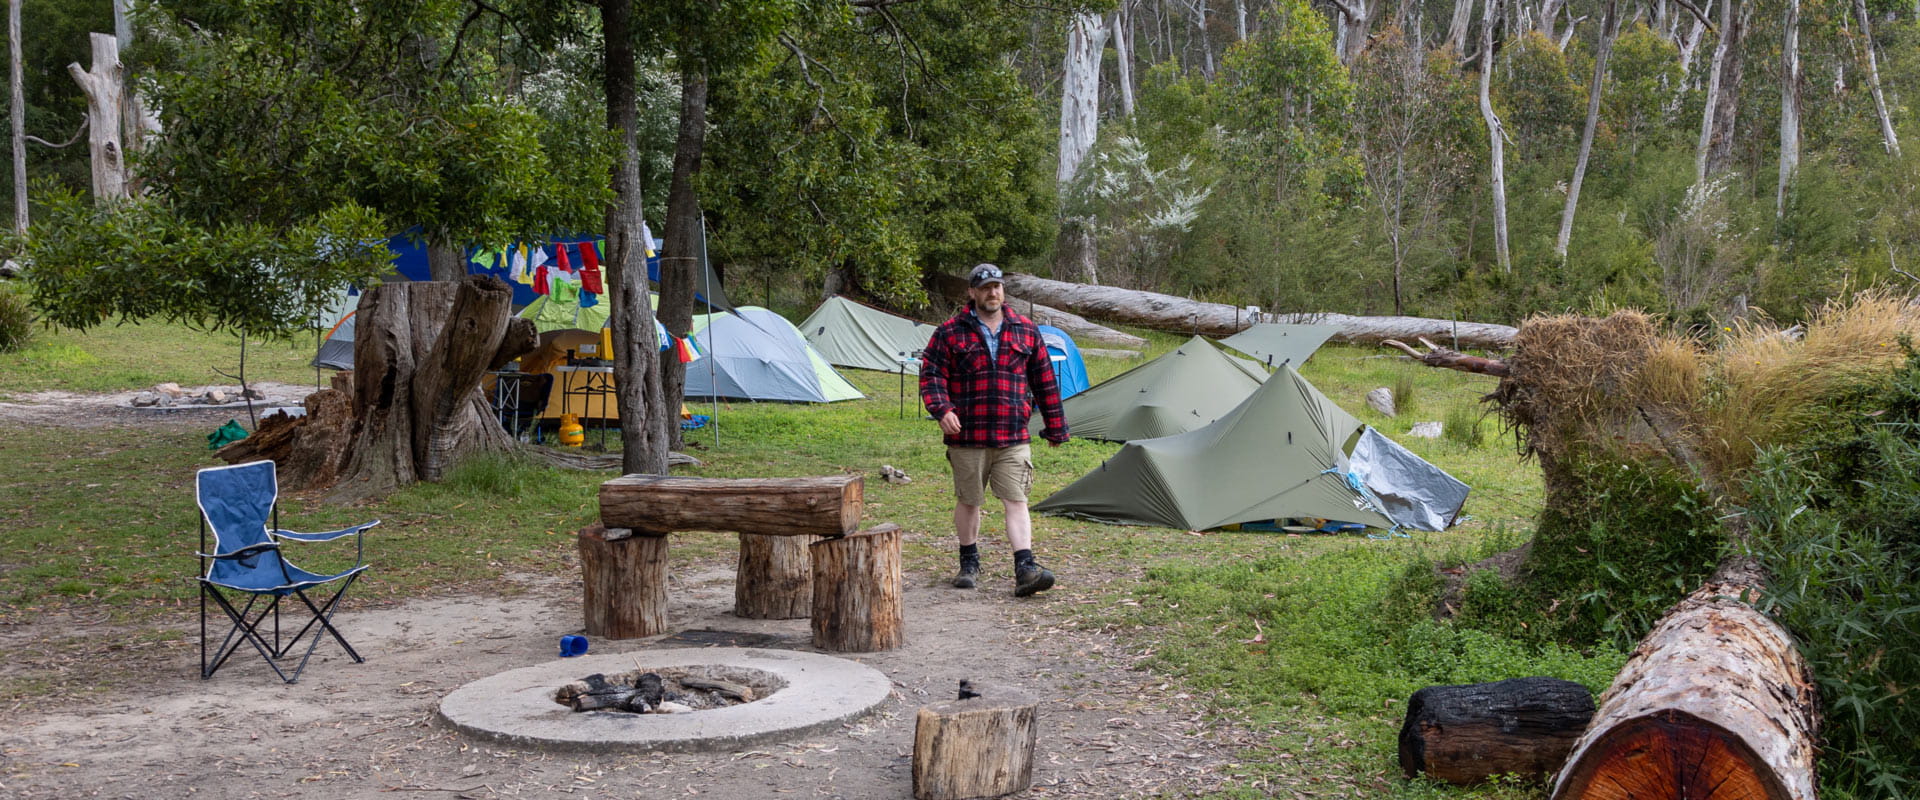 A man walks past a fire pit and rustic wooden log bench, with tents pitched in the campsite behind him bordered by large trees and dense vegetation.